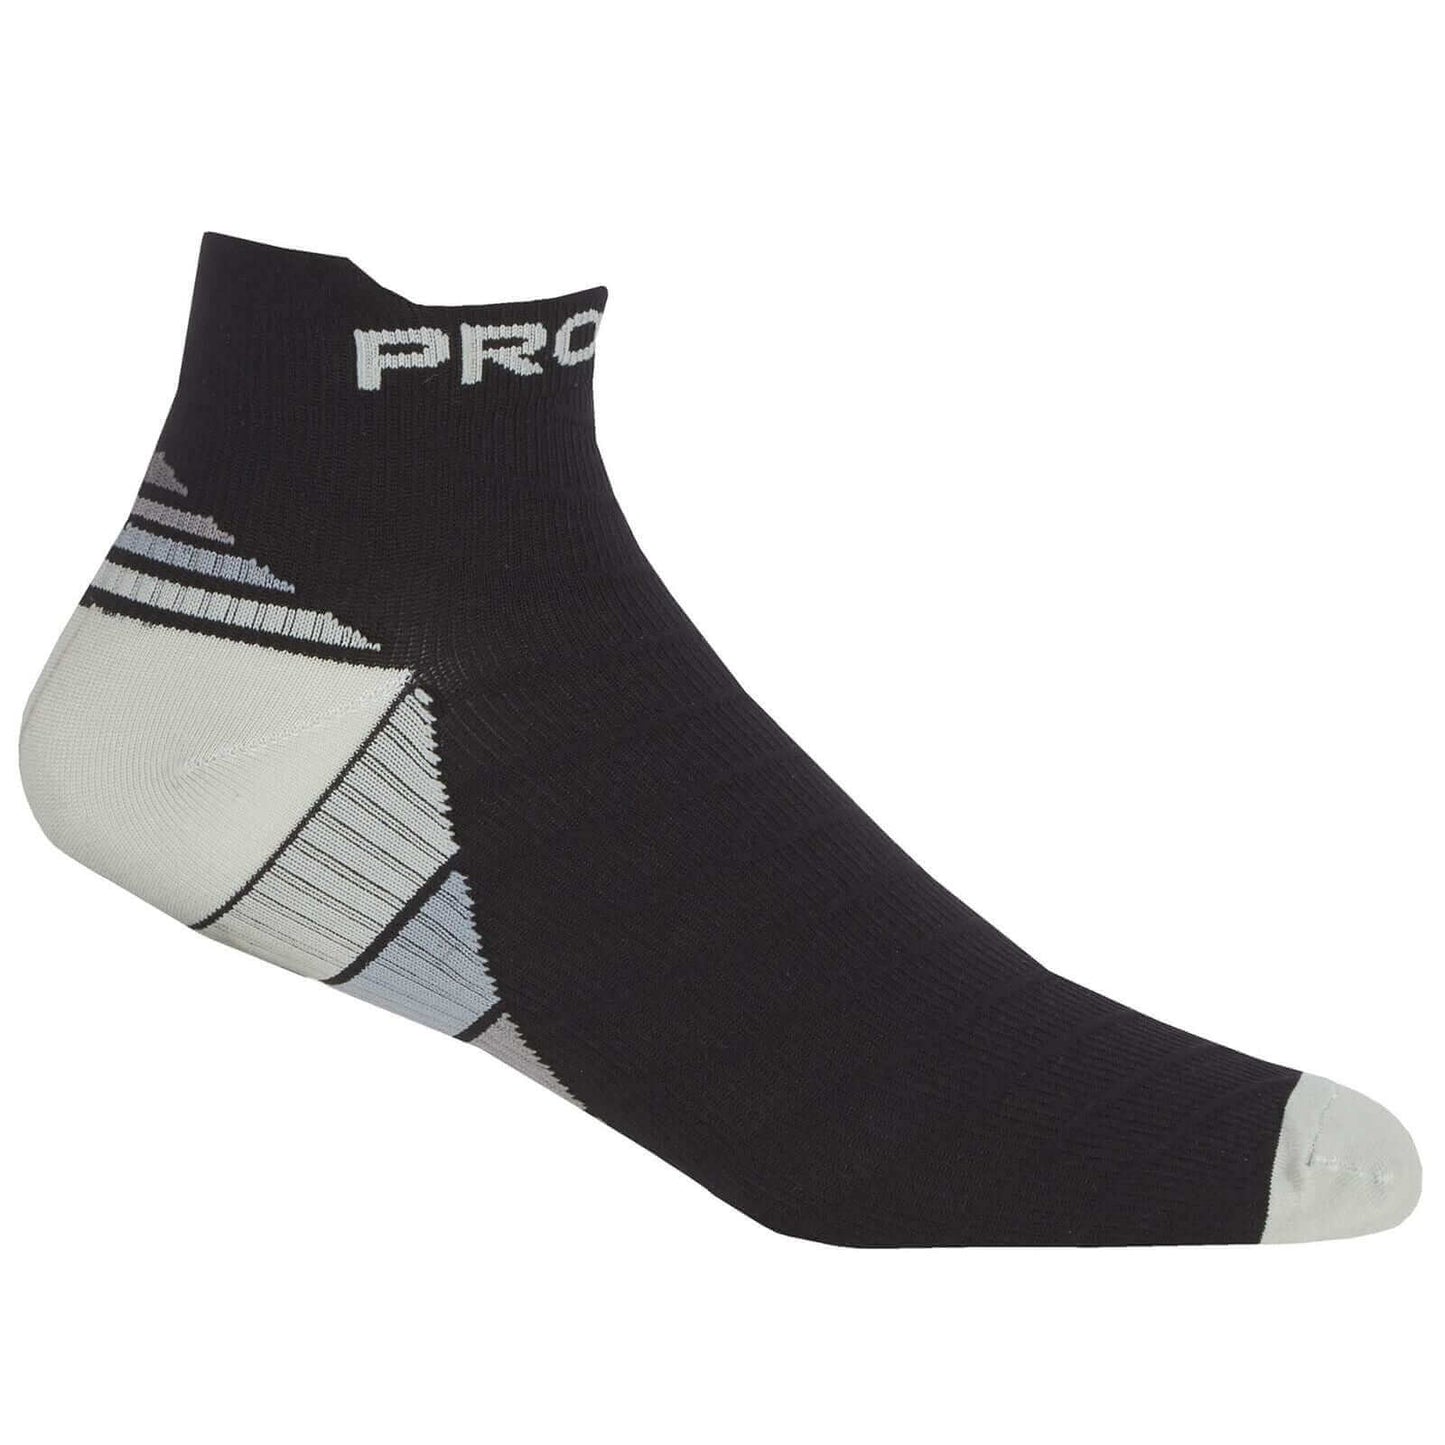 Pack Of 4 Men's Compression Low-Cut Running Training Gym Sock. Buy now for £9.00. A Socks by Sock Stack. 6-11, assorted, athletics, black, blue, boot, comfortable, cosy, elastane, gym, hiking, low cut, mens, mens socks, outdoor, running, socks, sports, st